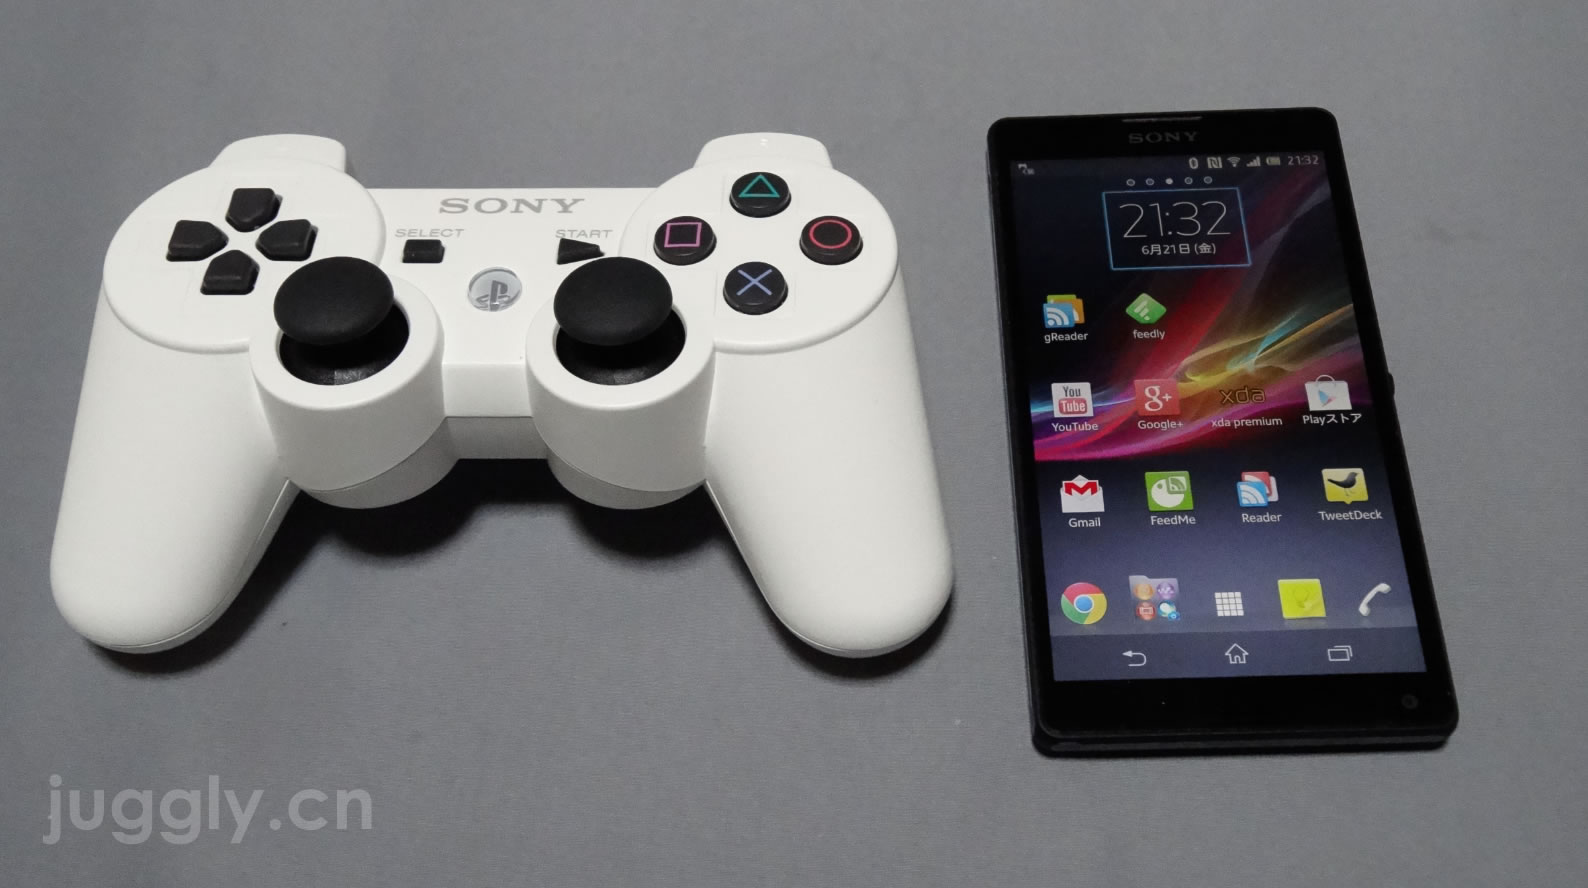 Xperia Zlがandroid 4 2 2へのアップデートでps3用ゲームコントローラー Dualshock3 に対応 セットアップ手順や使い方を紹介 Juggly Cn